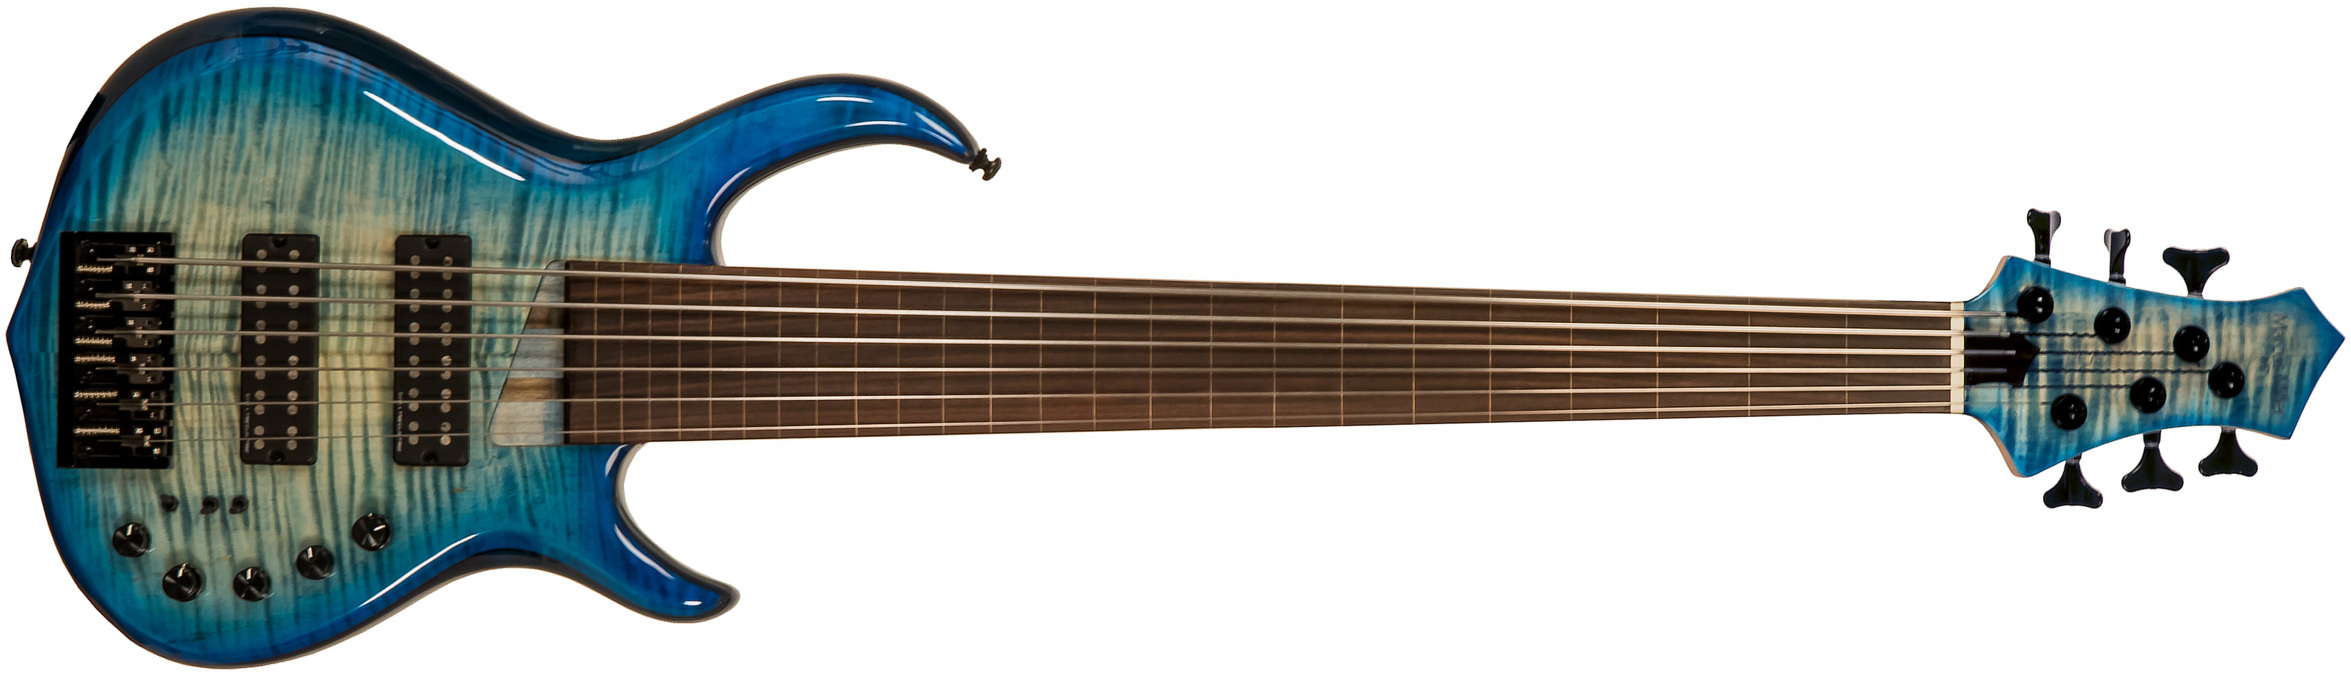 Marcus Miller M7 Swamp Ash 6st Fretless 6c Active Eb - Transparent Blue - Solid body electric bass - Main picture